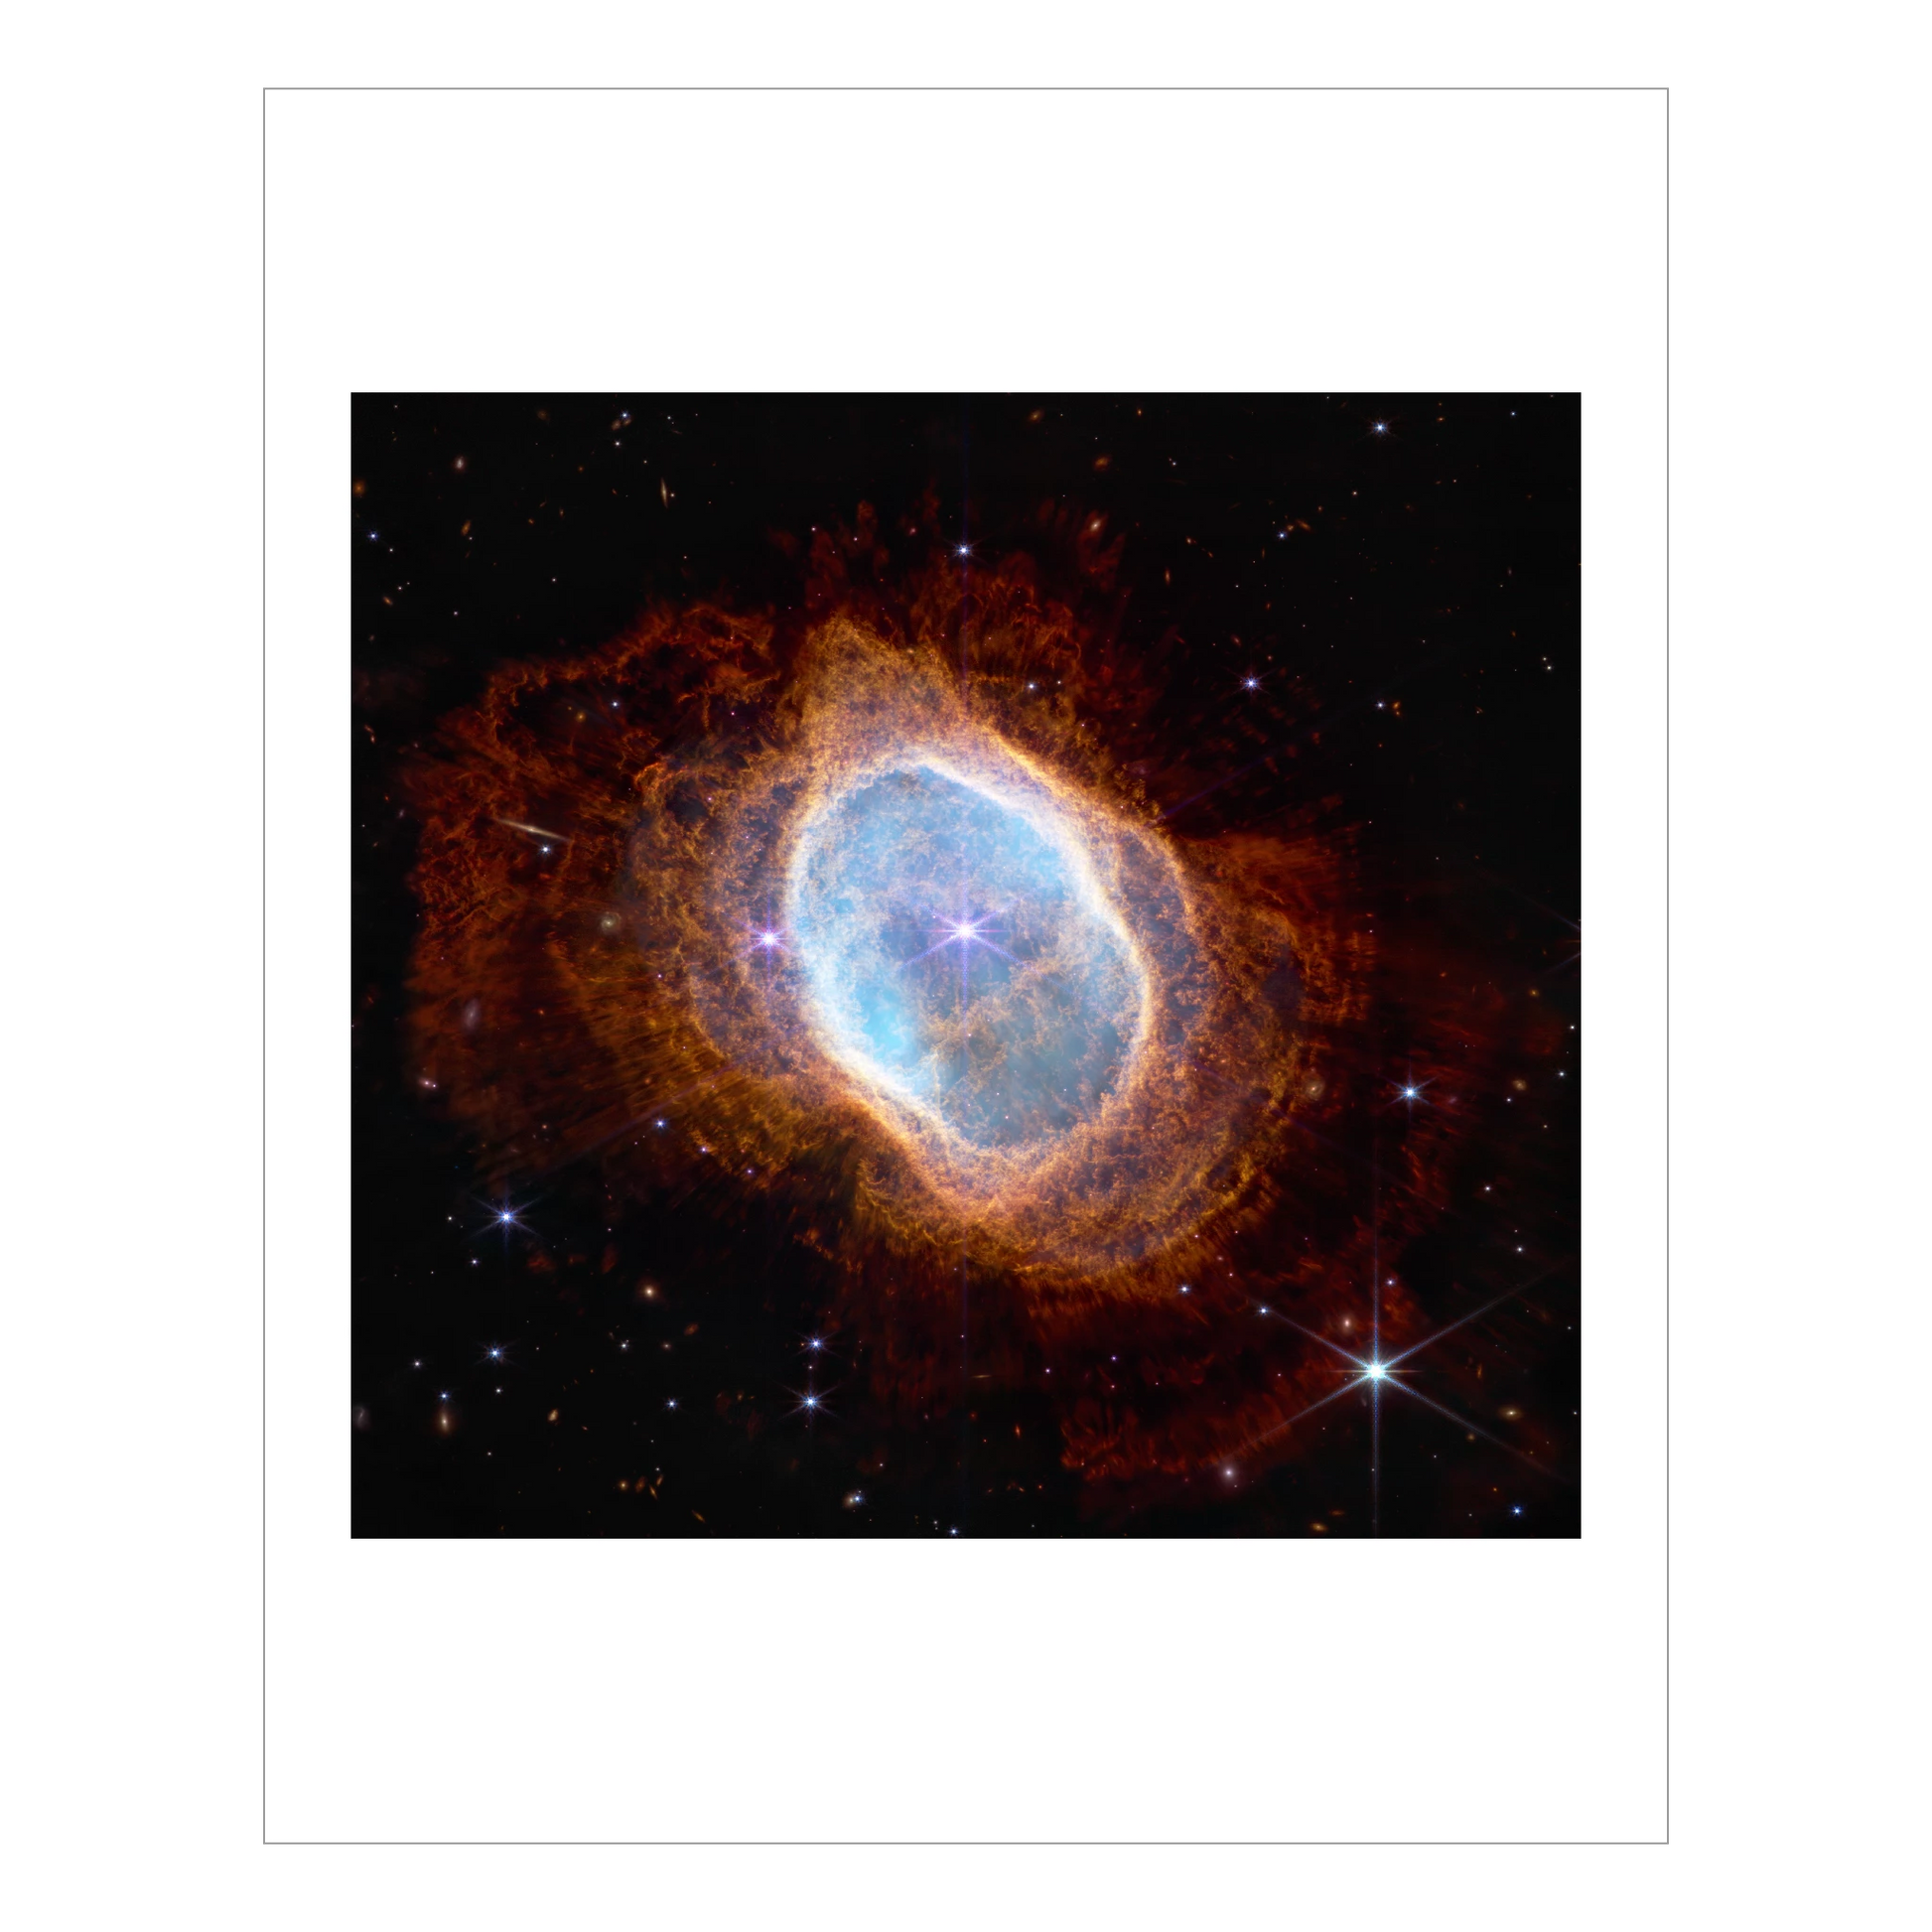 Planetary nebula known as the Southern Ring Nebula, ring of gas and dust with stars behind, taken by the NIRCam.